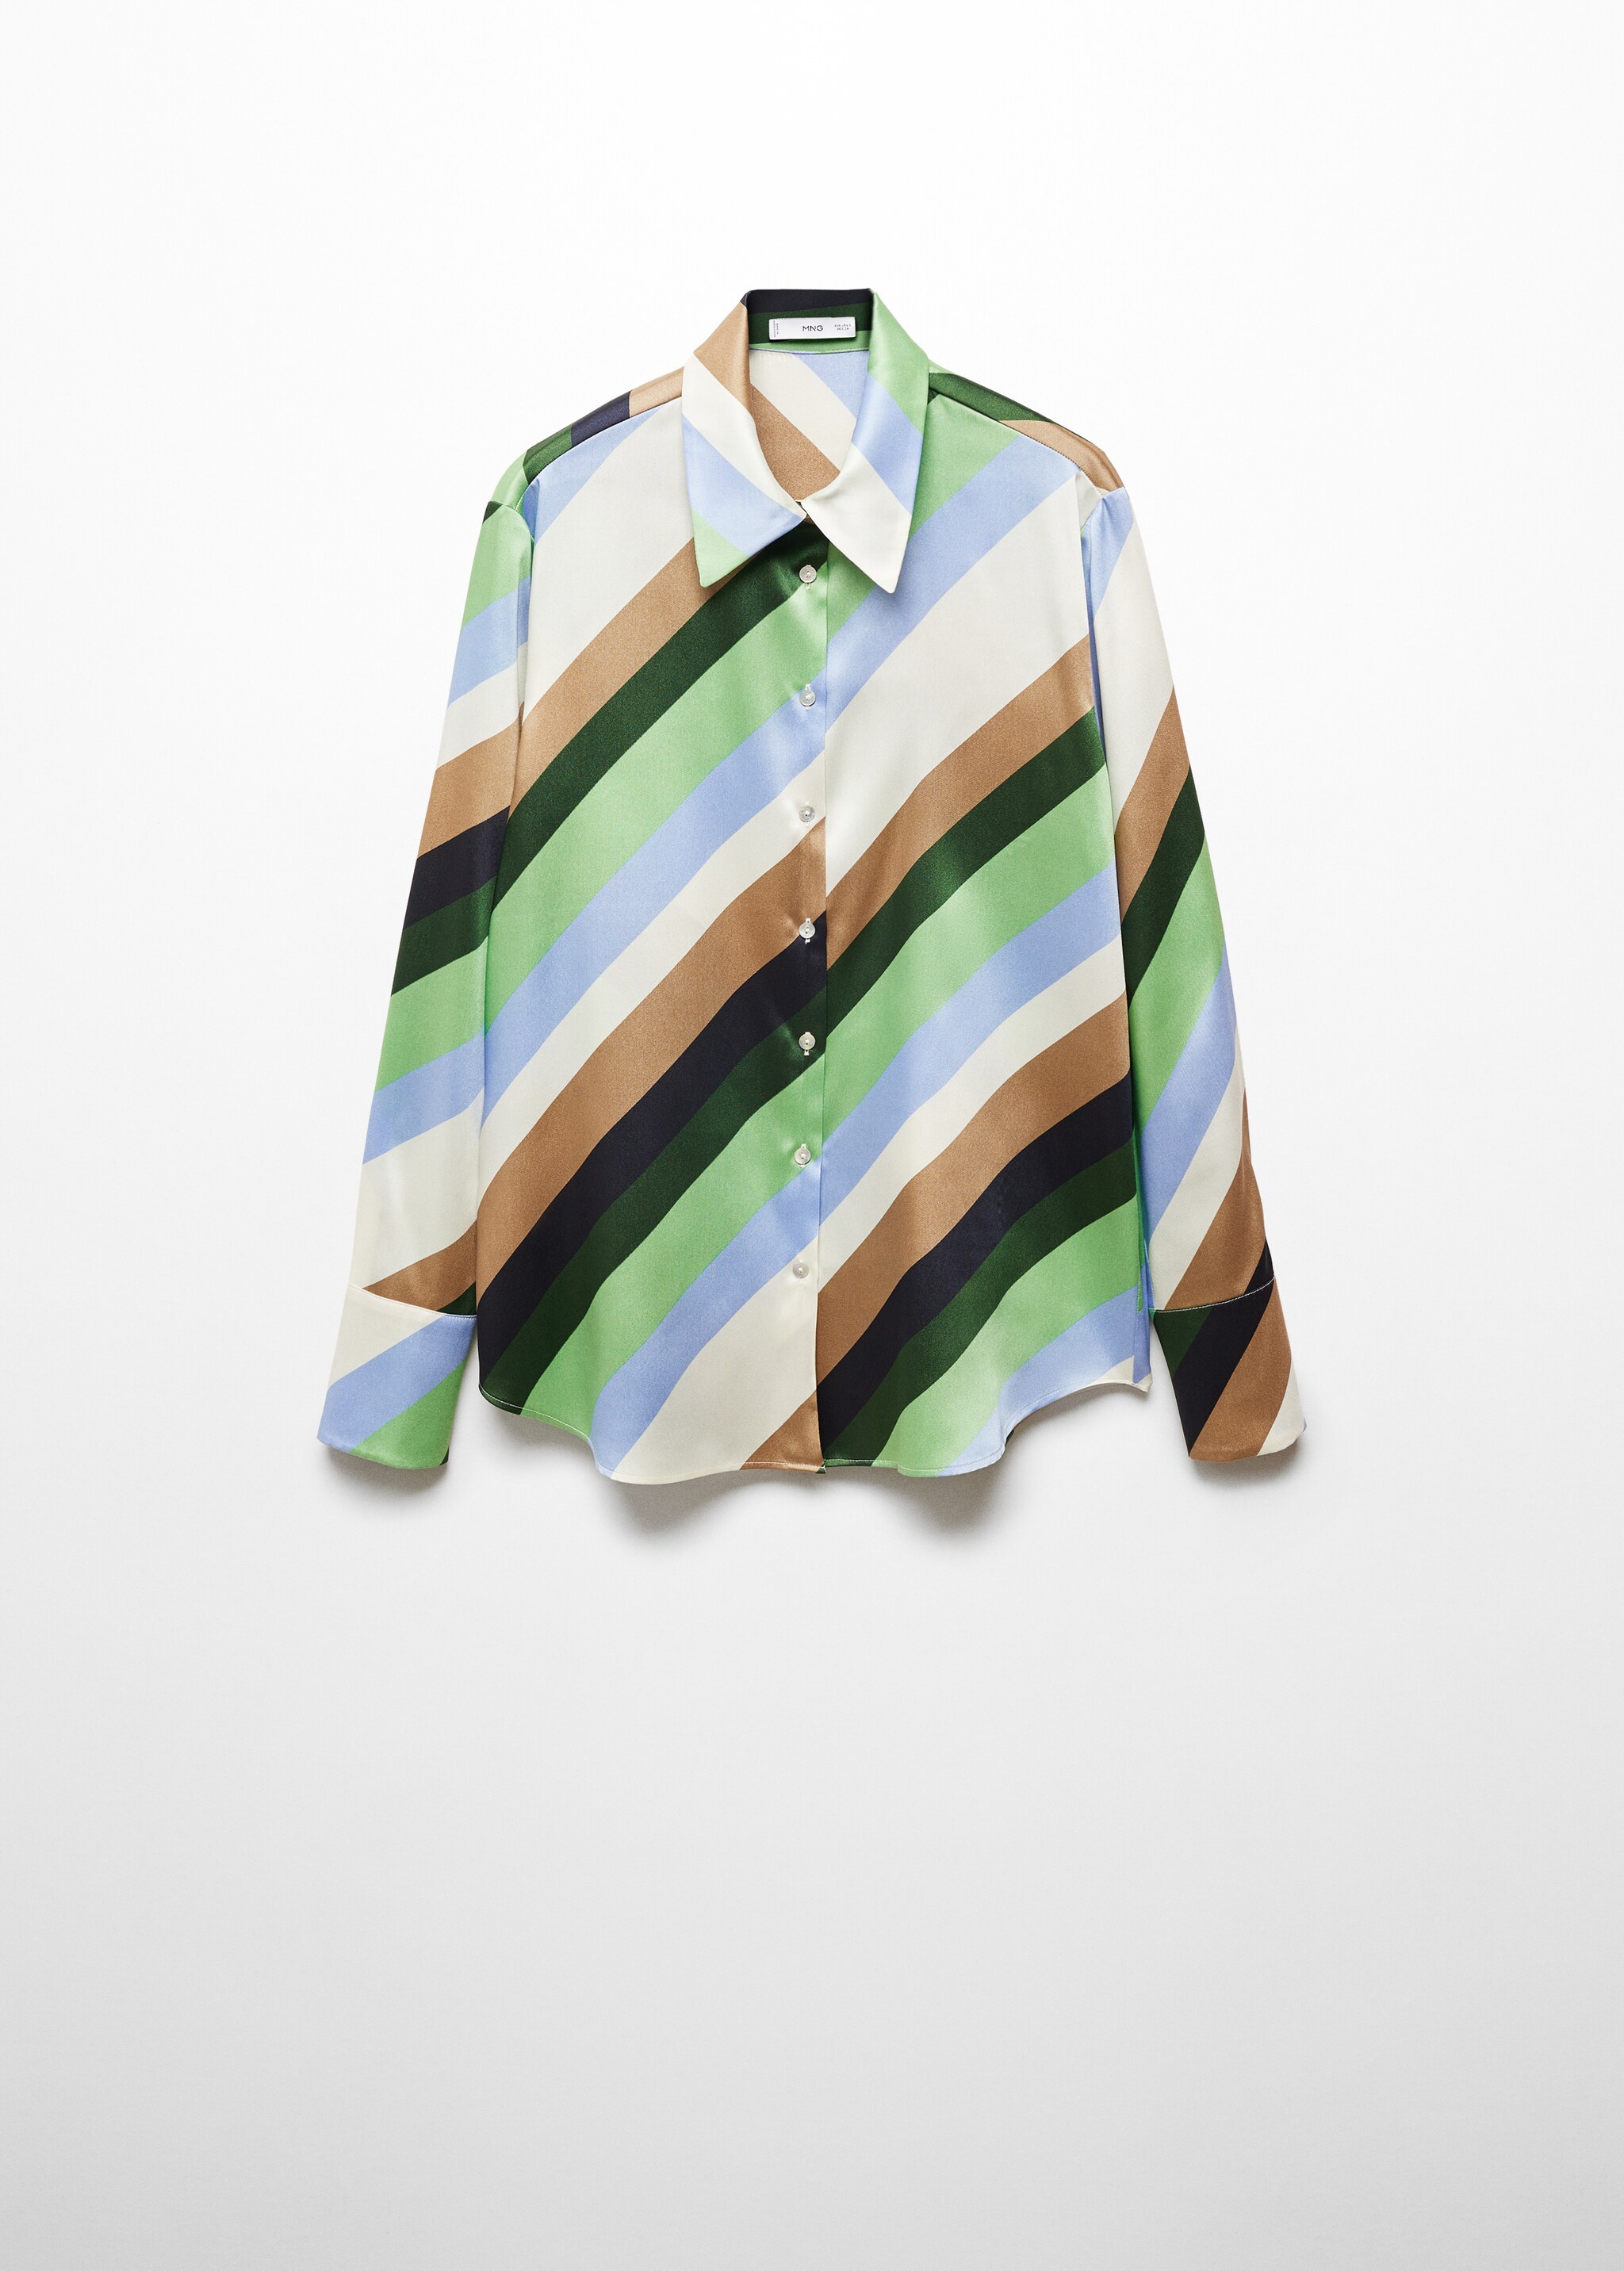 Satin striped shirt - Article without model